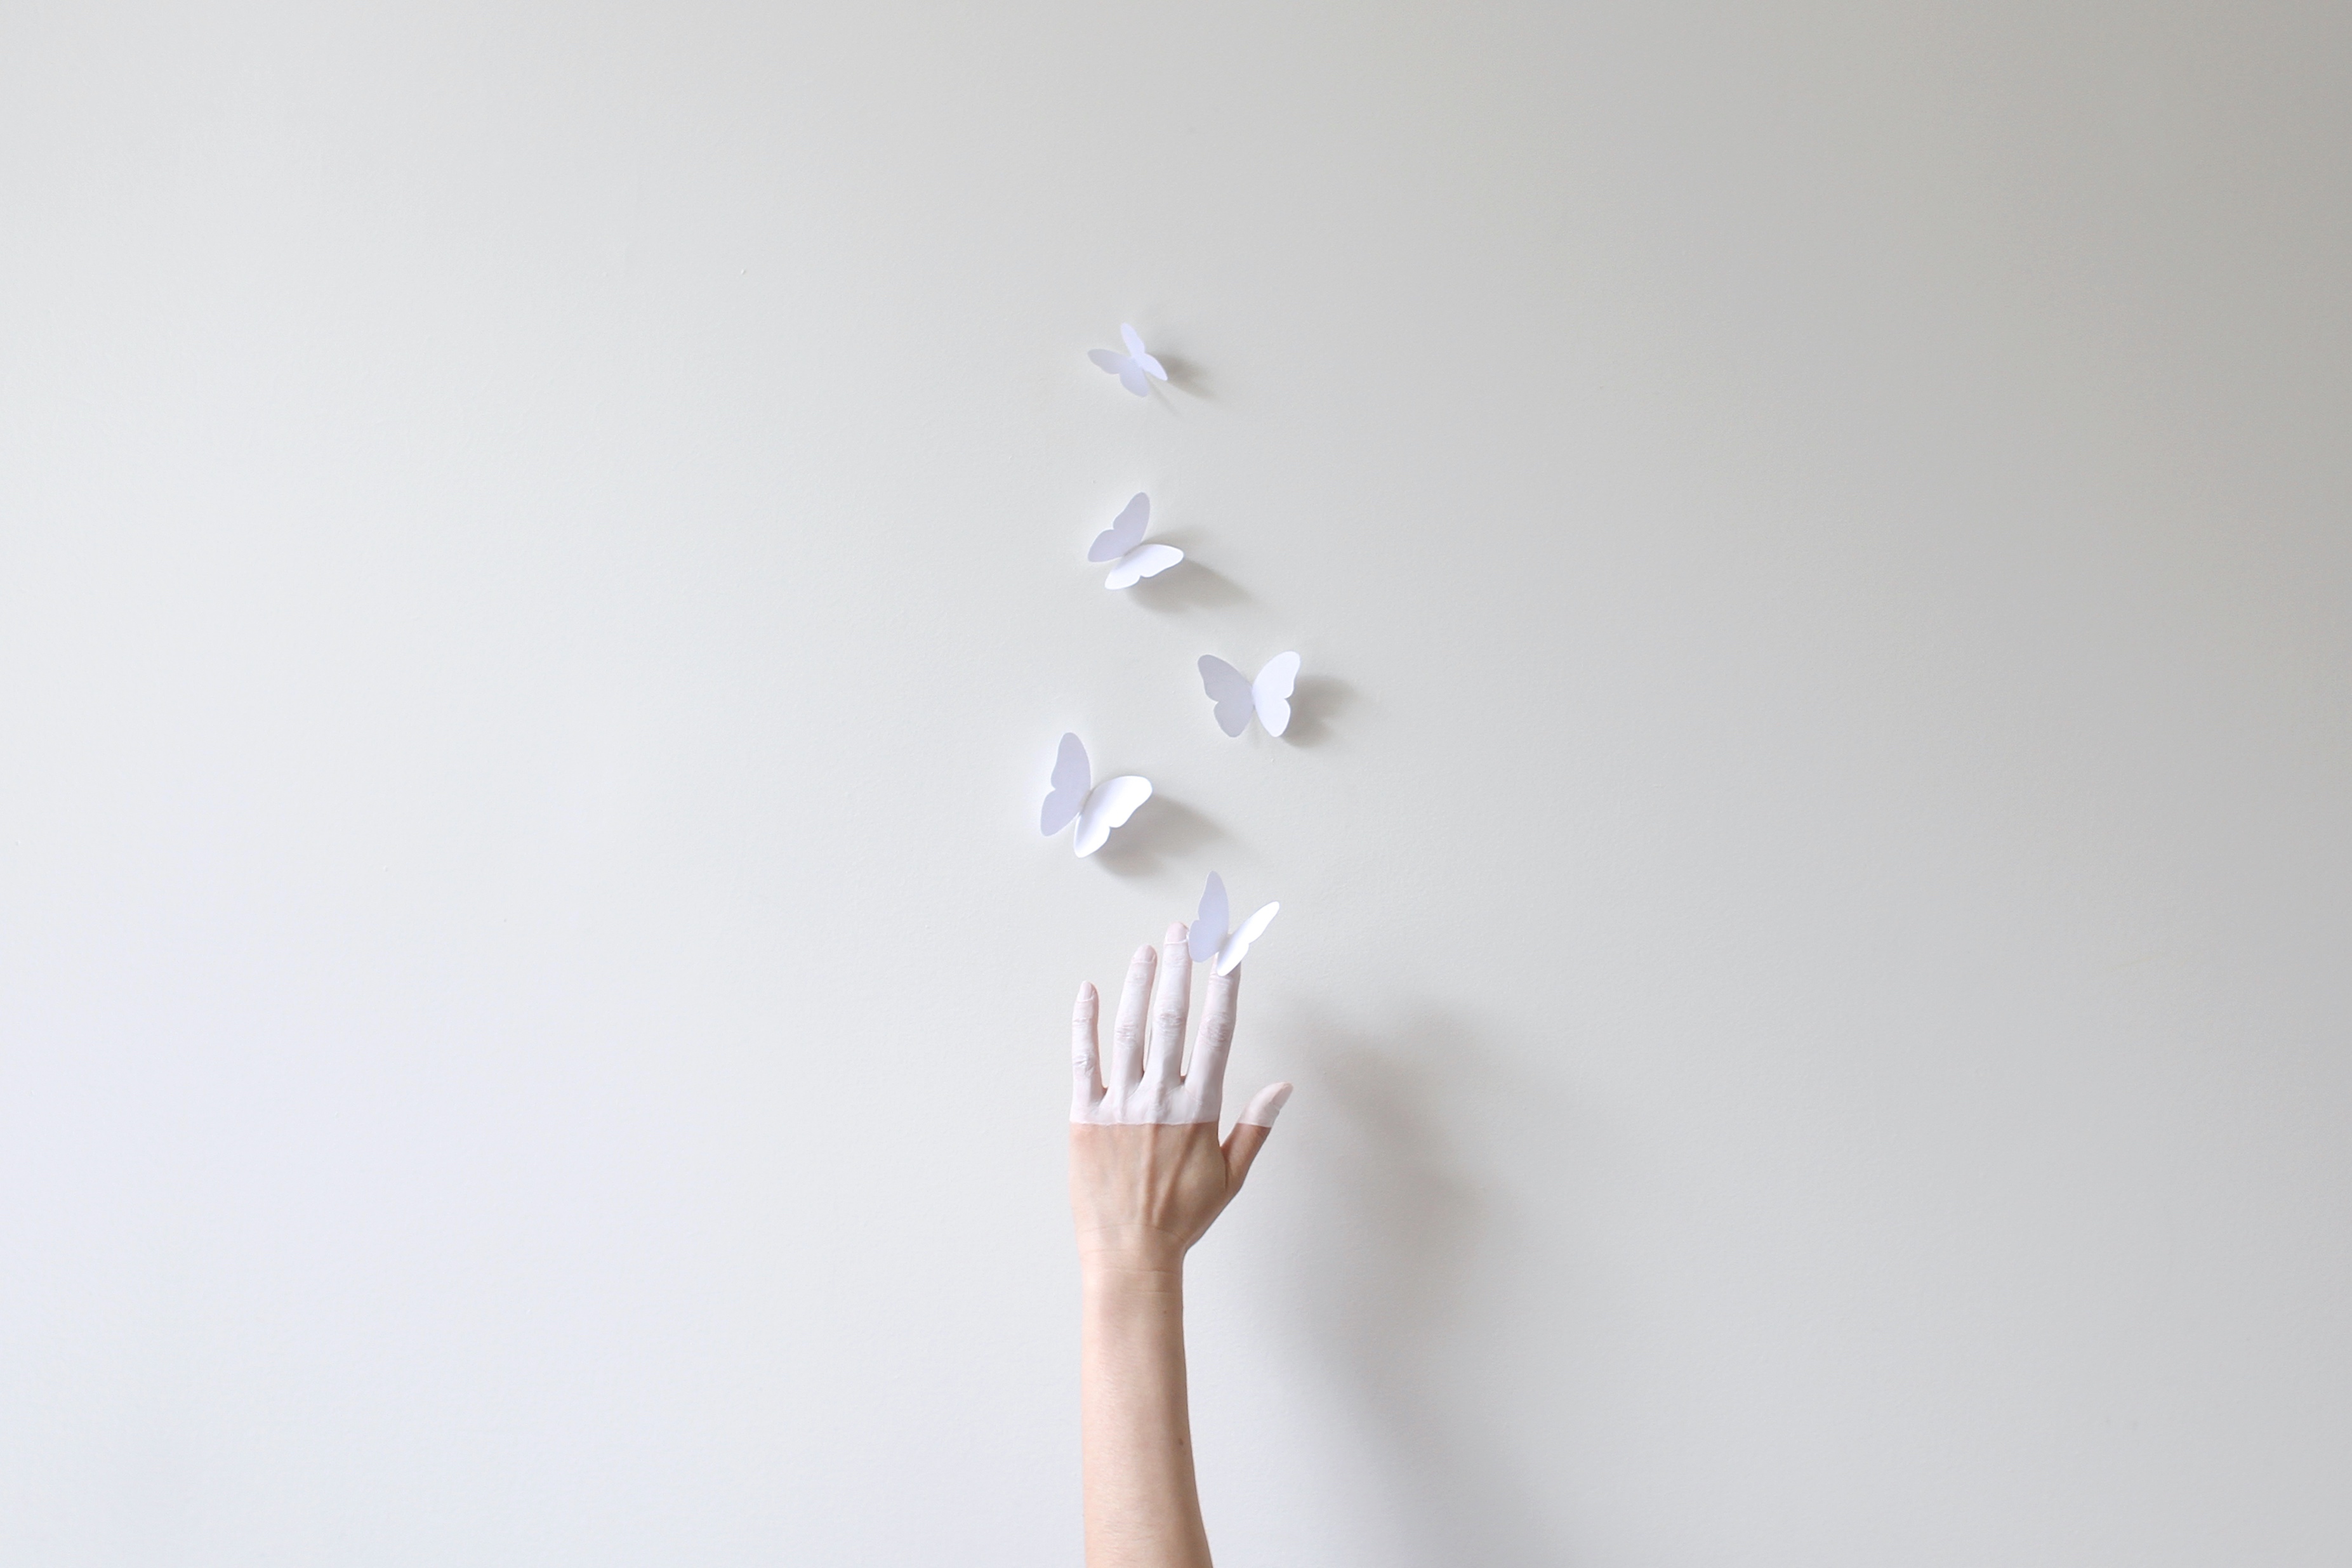 A hand half painted in white reaching up to white paper butterflies against white wall (Getty Images)